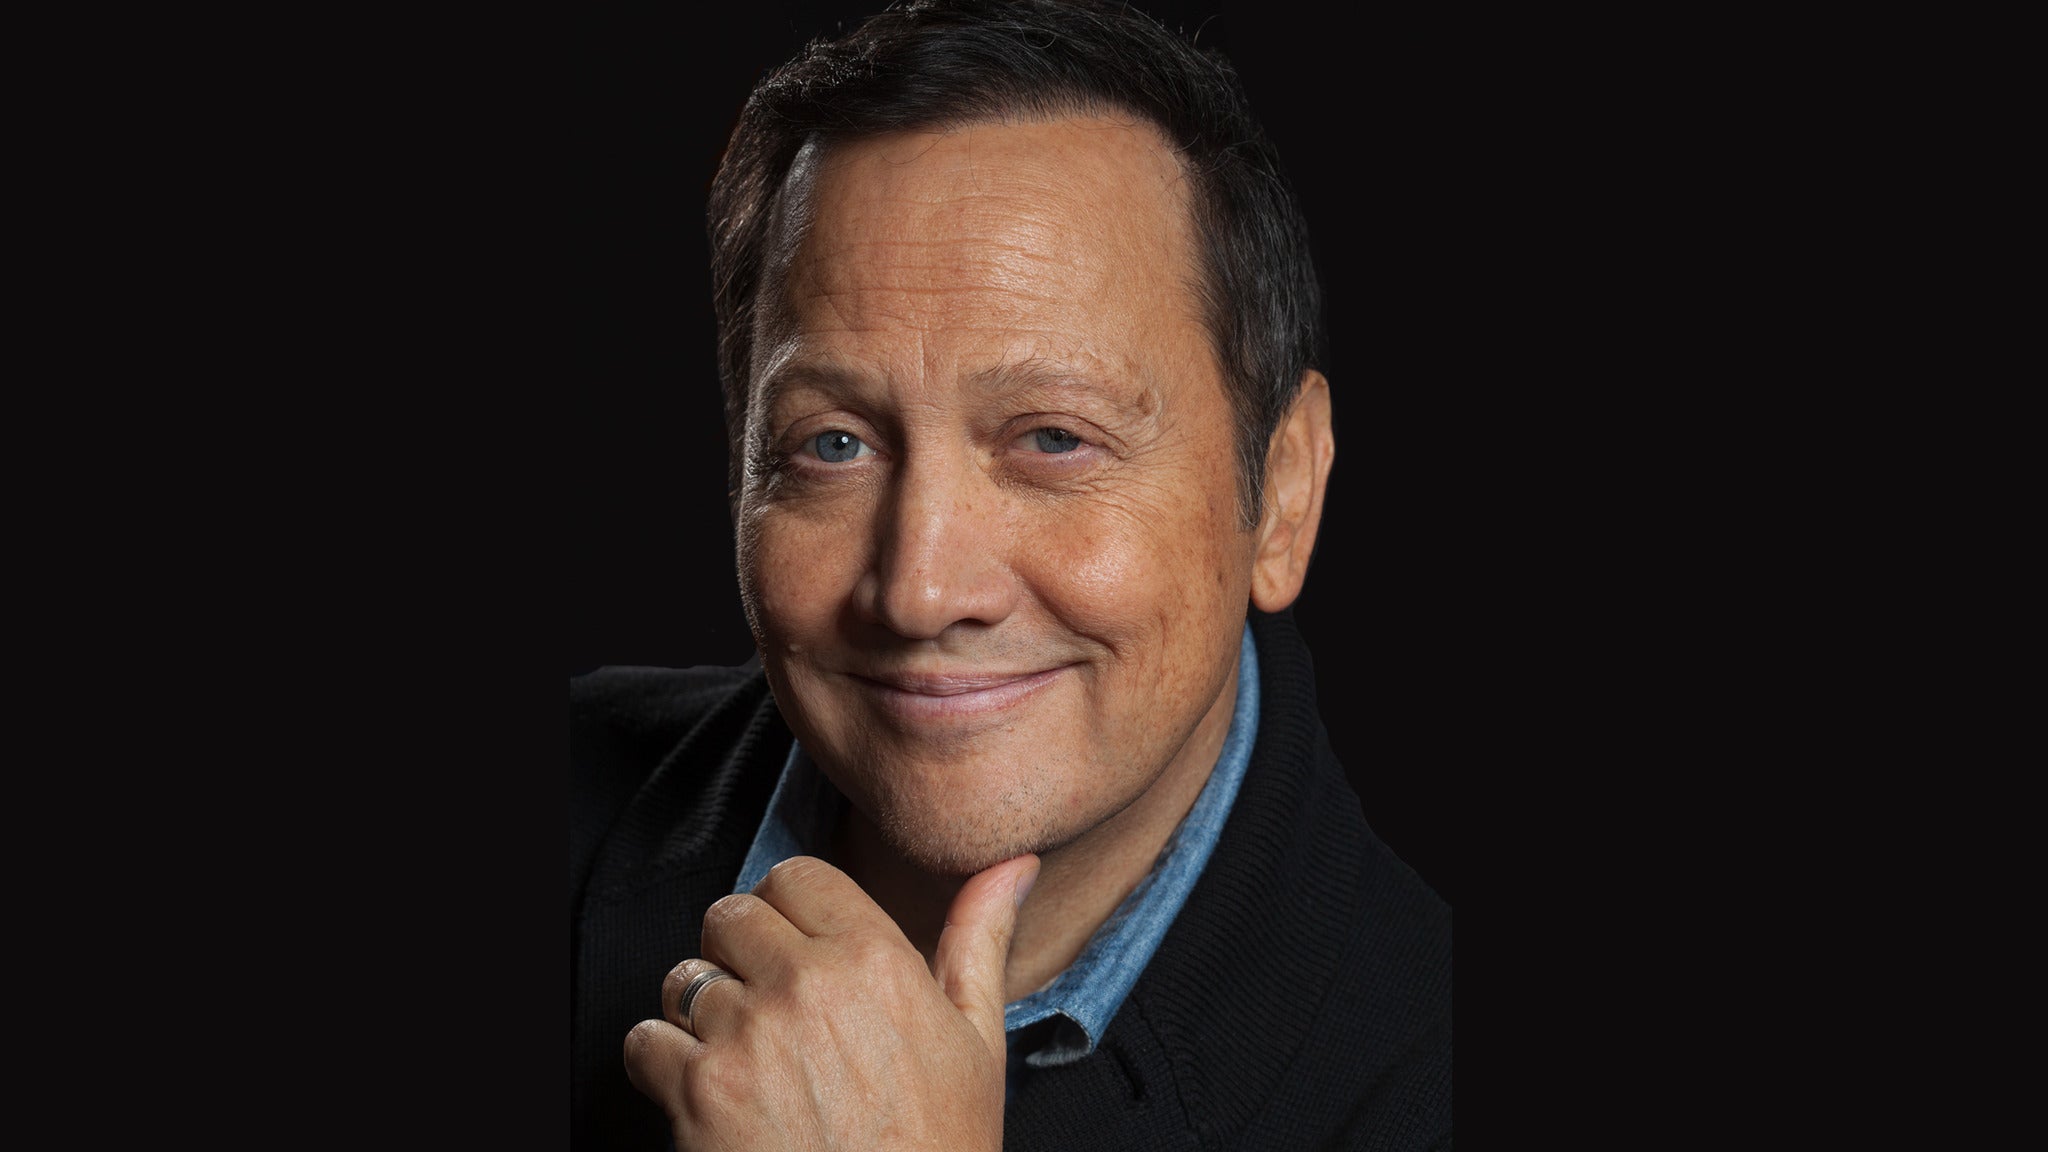 Rob Schneider: I Have Issues Tour